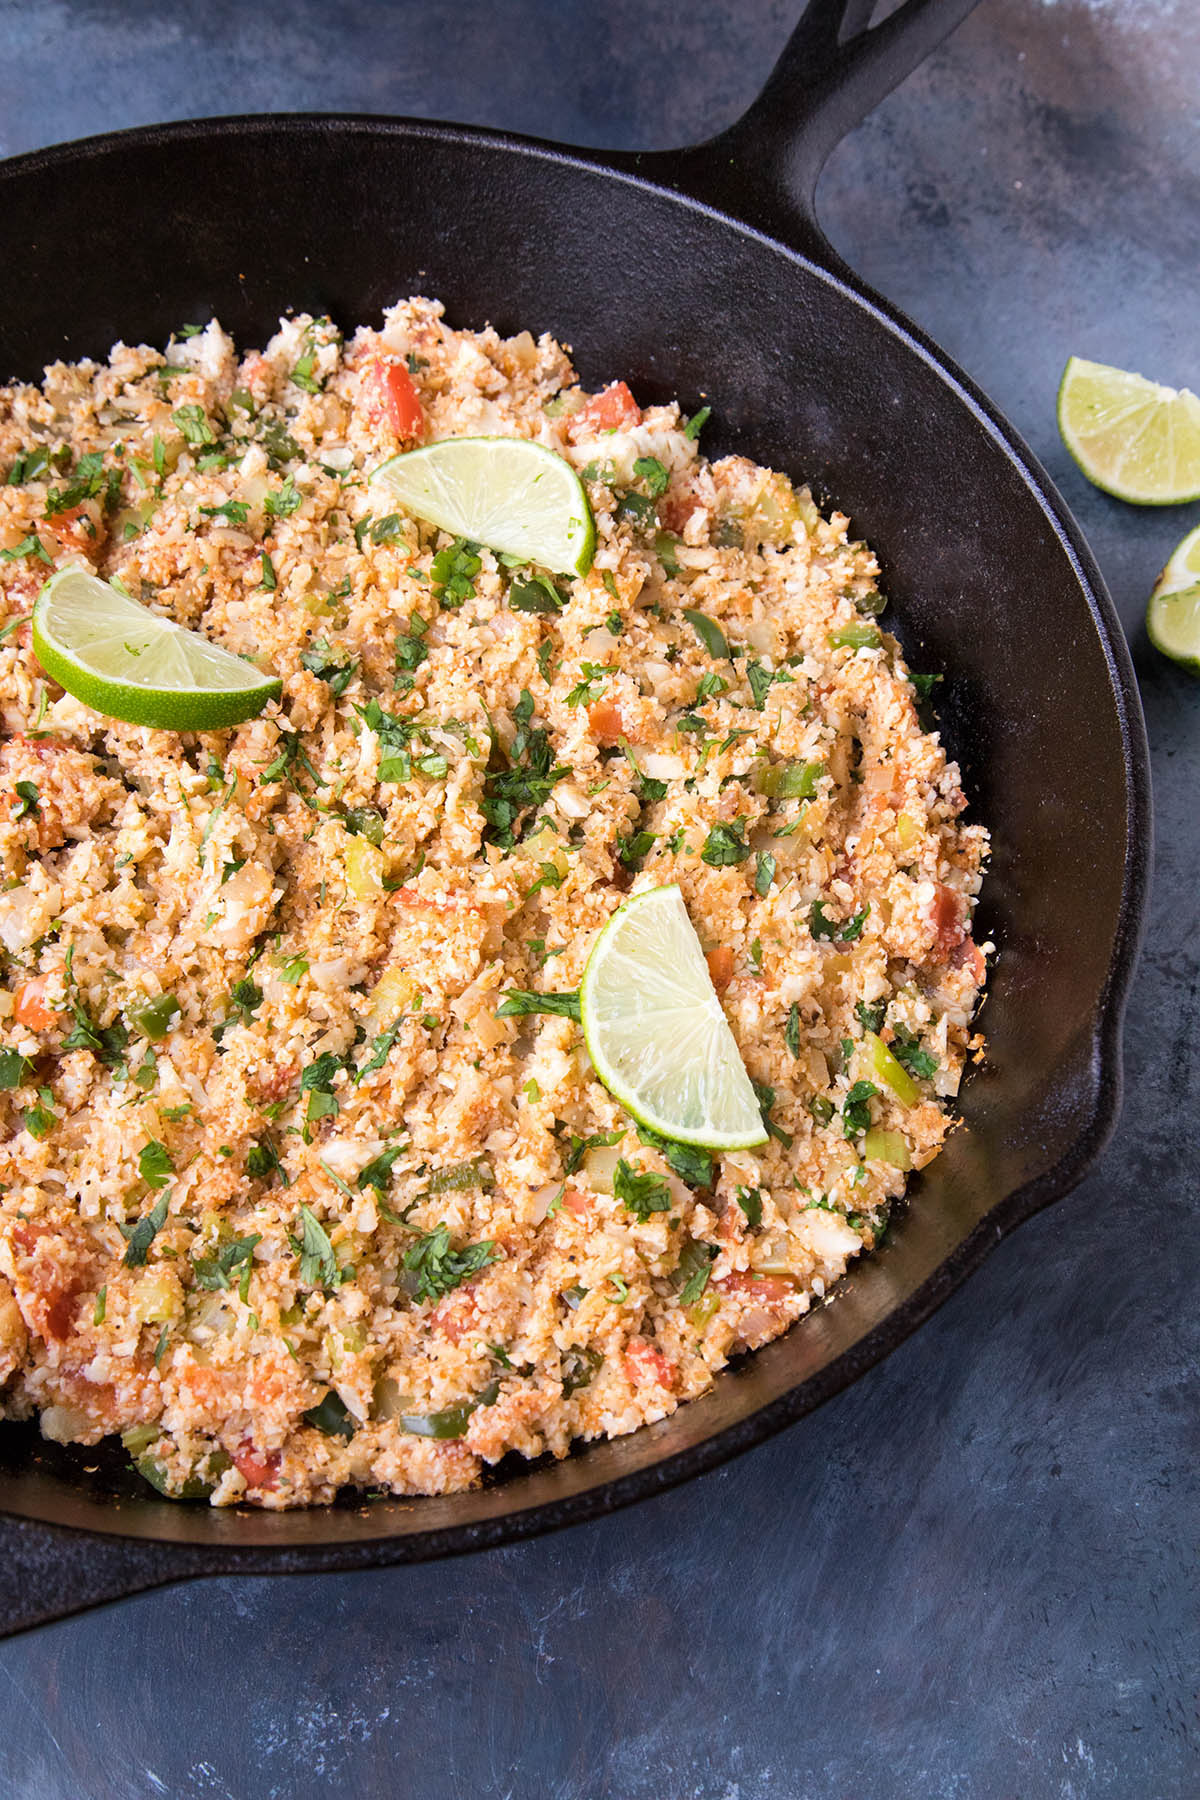 Cajun Cauliflower Rice in the pan. I could eat this every night of the week.